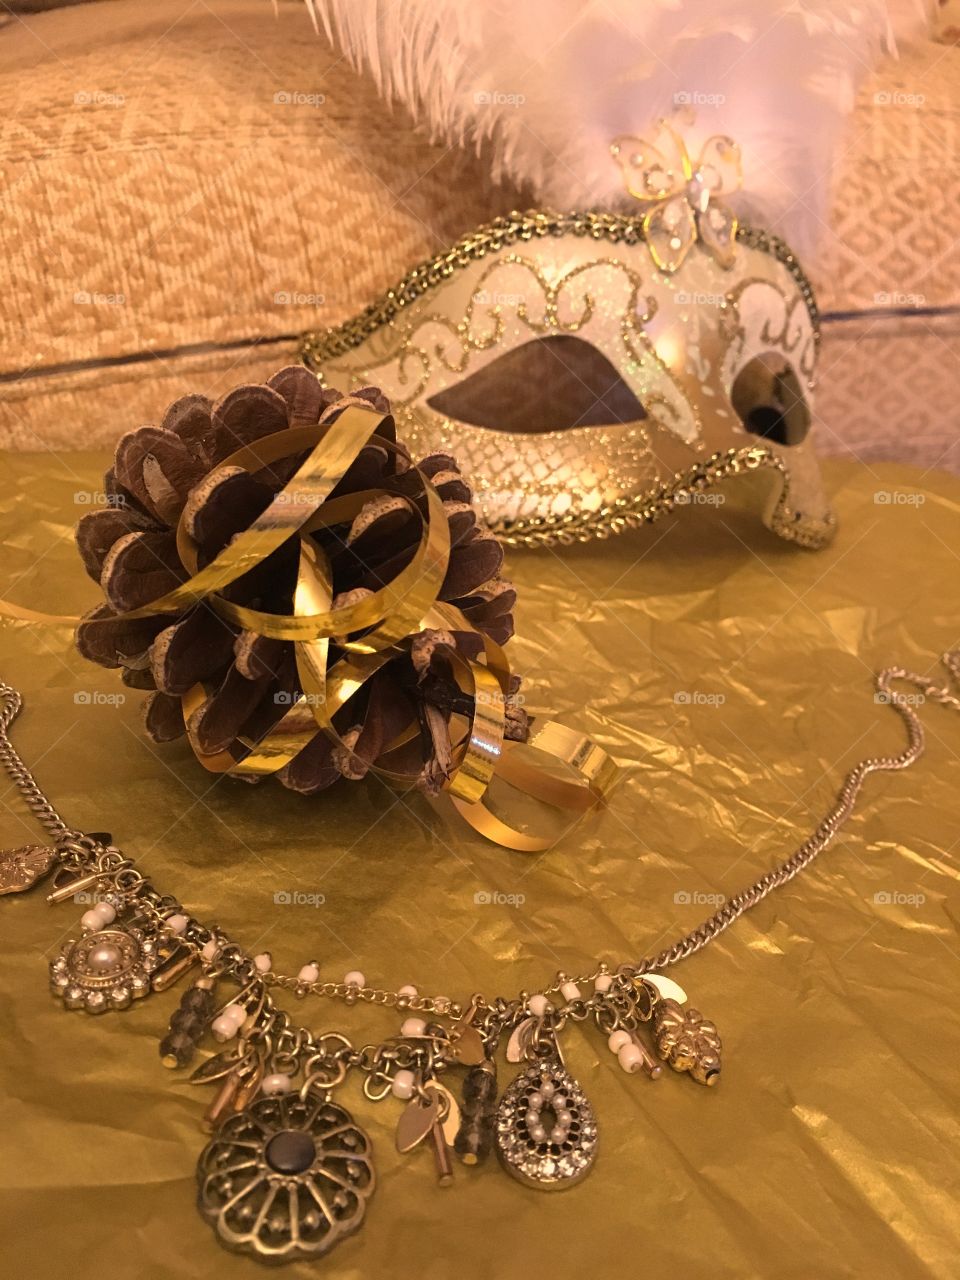 Gold charm necklace with a pinecone swirled in gold curling ribbon with a gold Venetian masquerade mask 